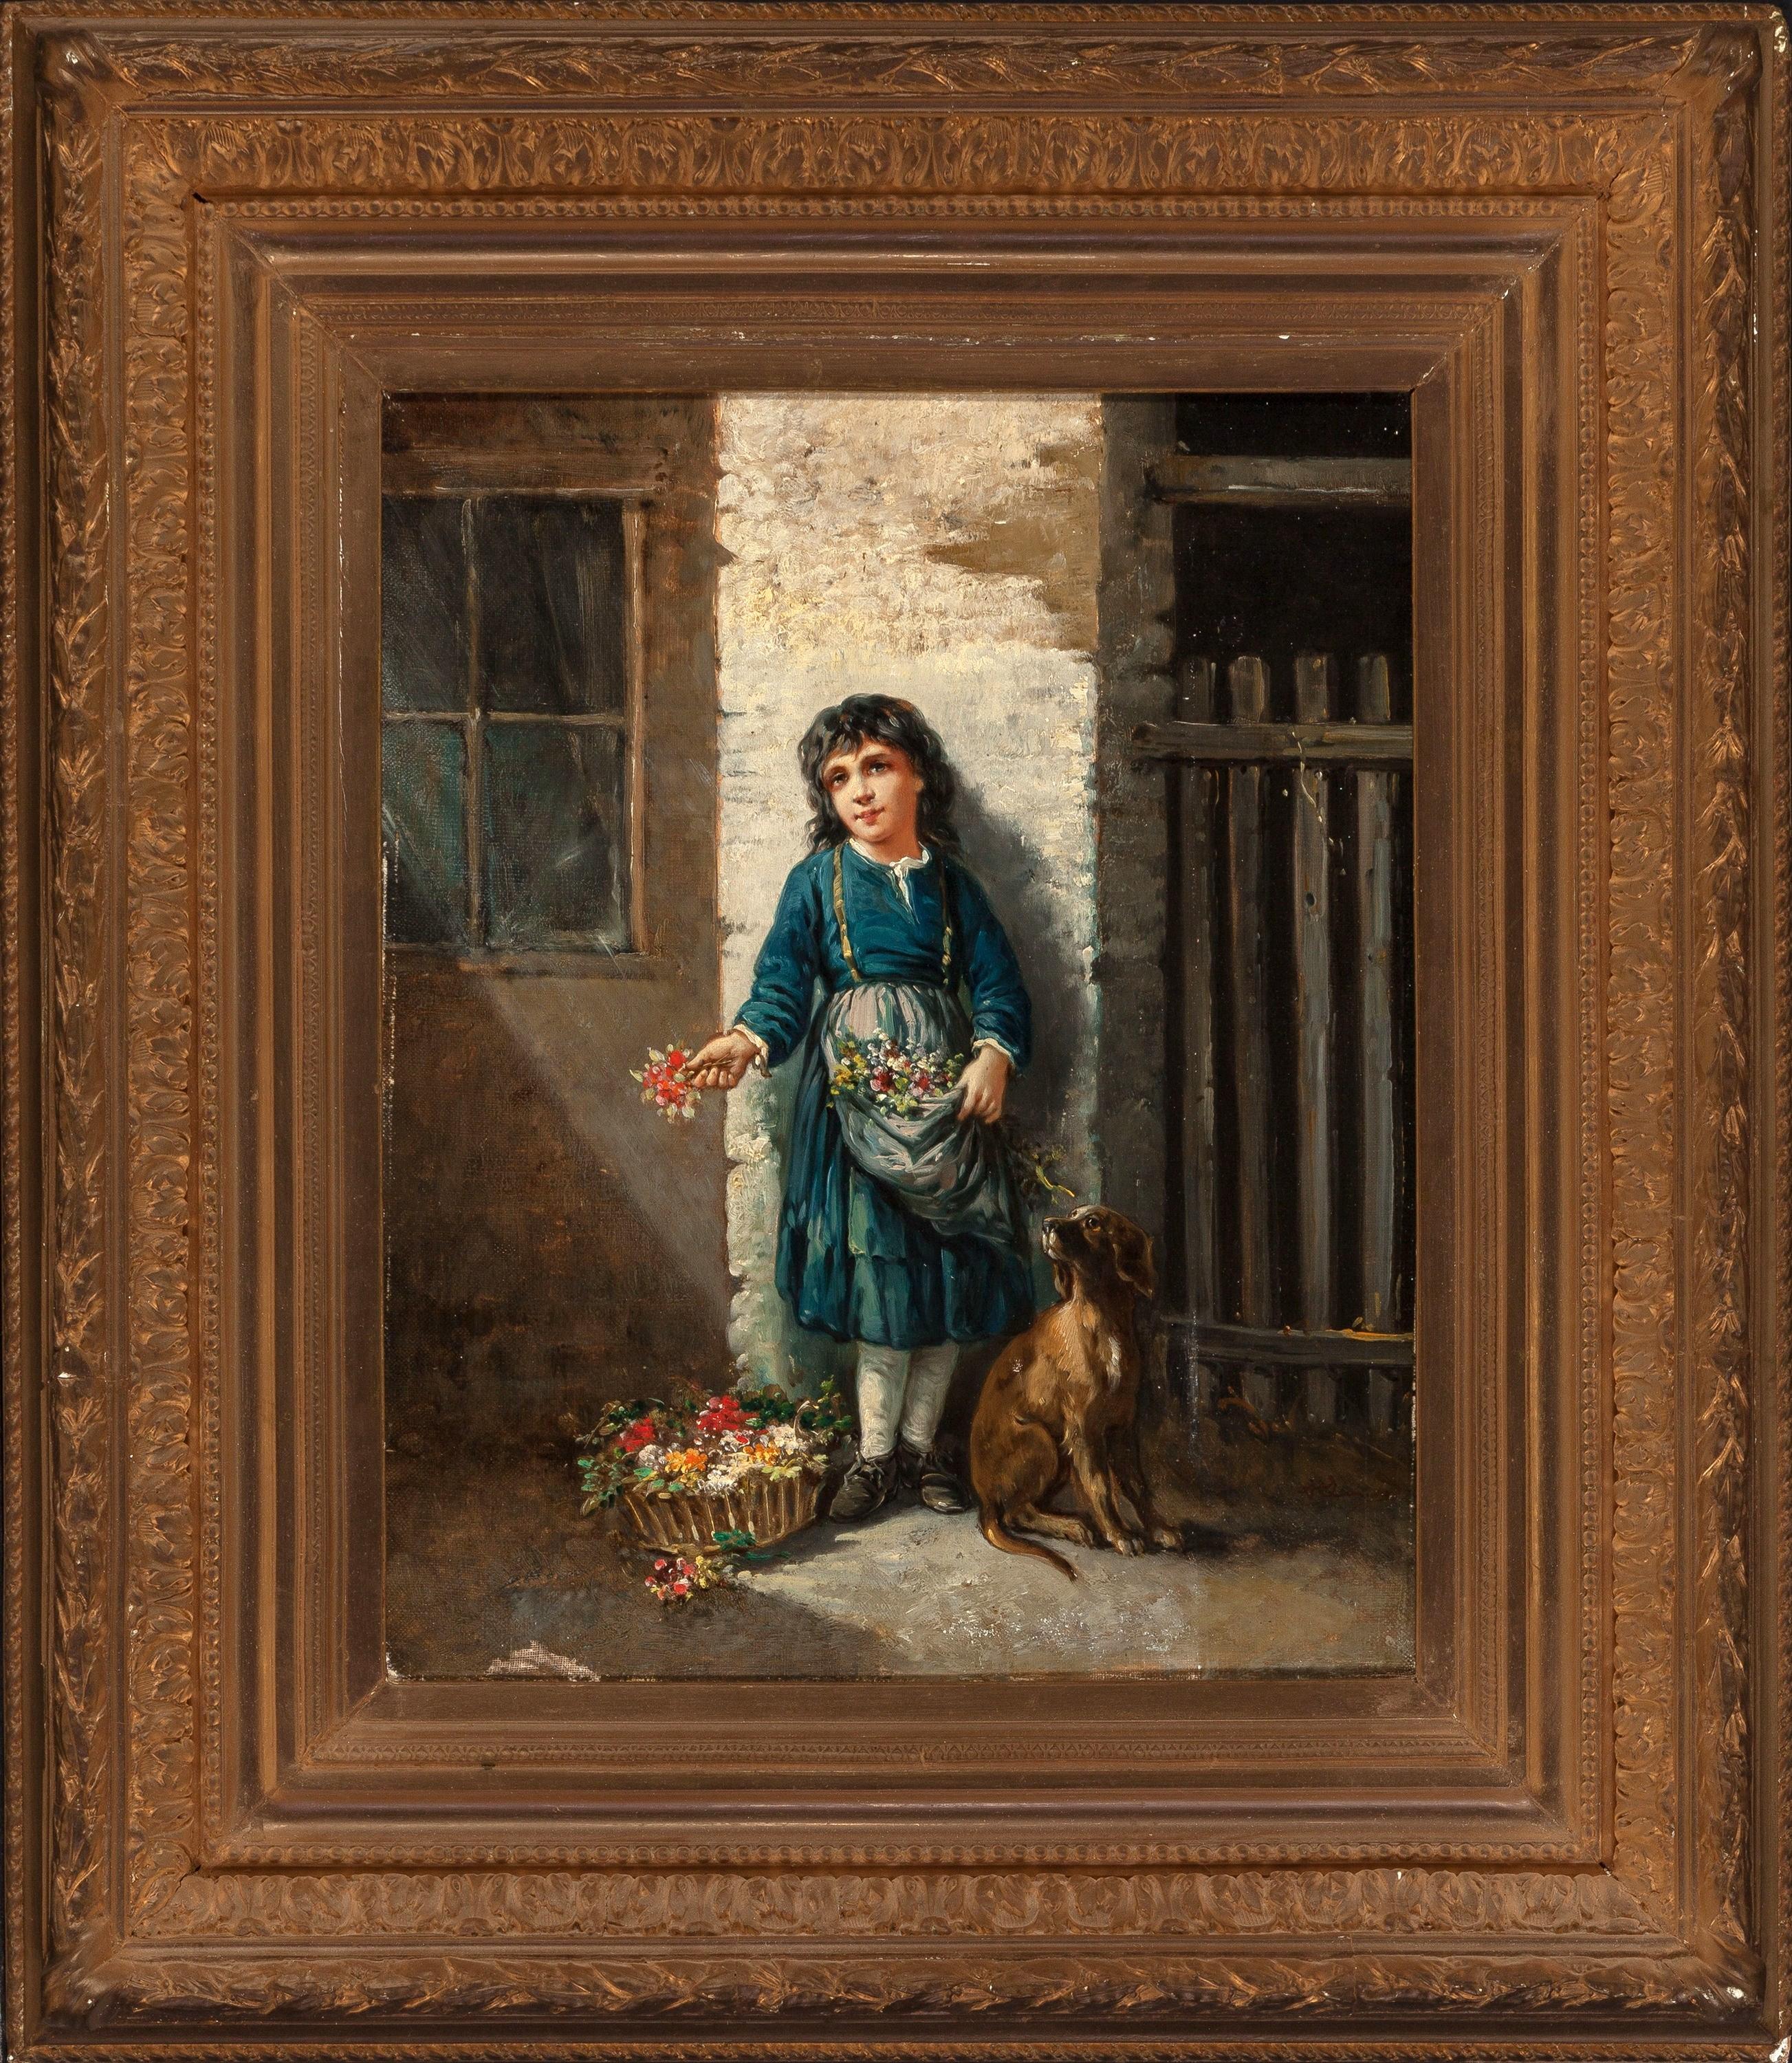 Pair of 19th century Italian school oil paintings signed A. Leonard (1886), depicting the 